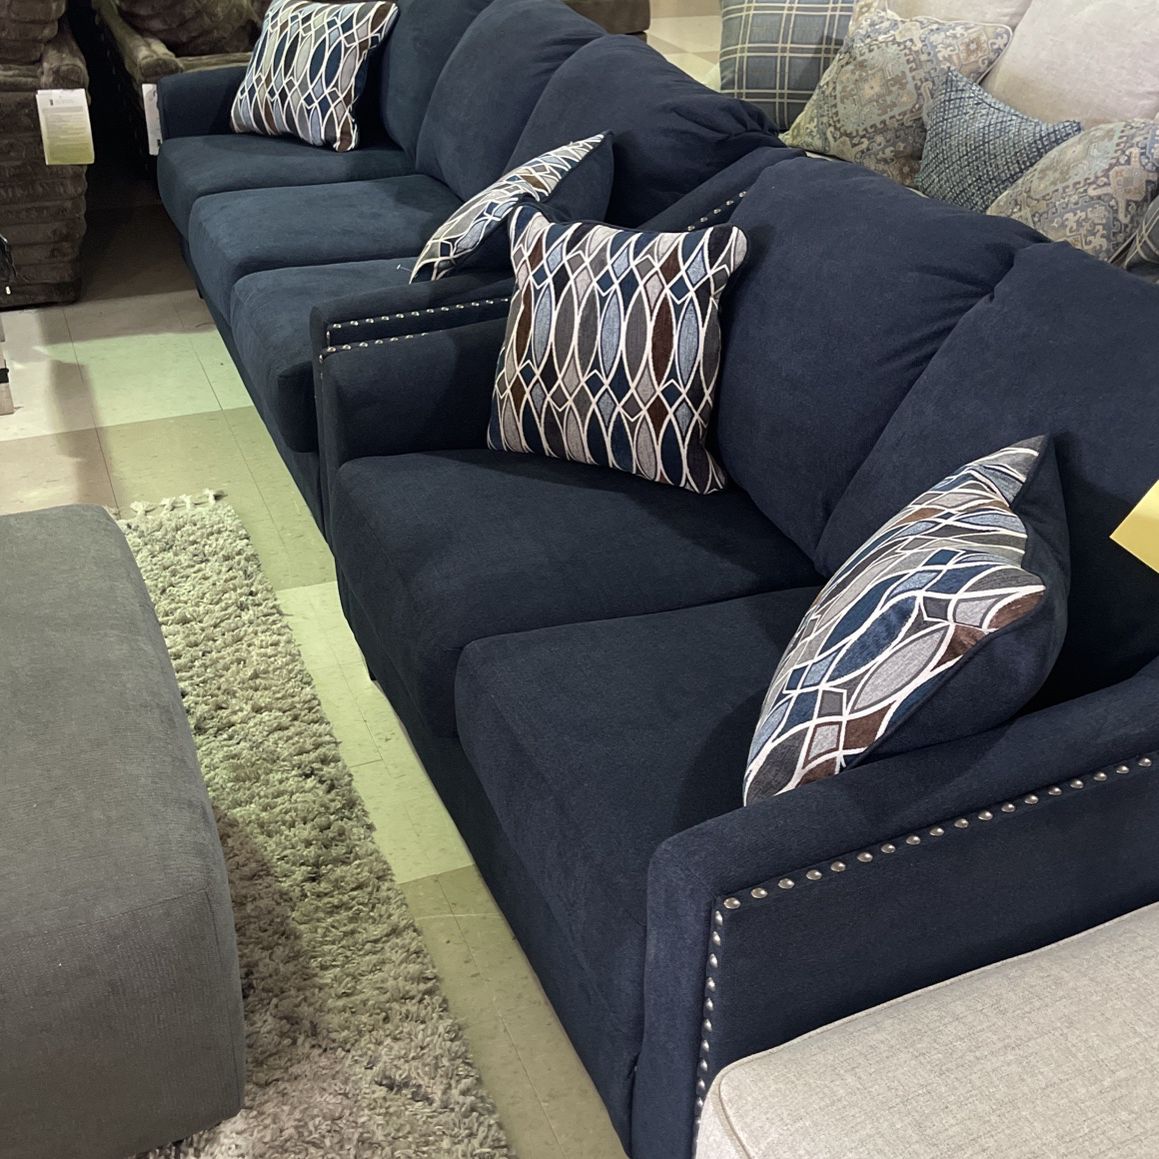 Blue Sofa Love Set On Sale - Loving Room - Ask For Payment Plan